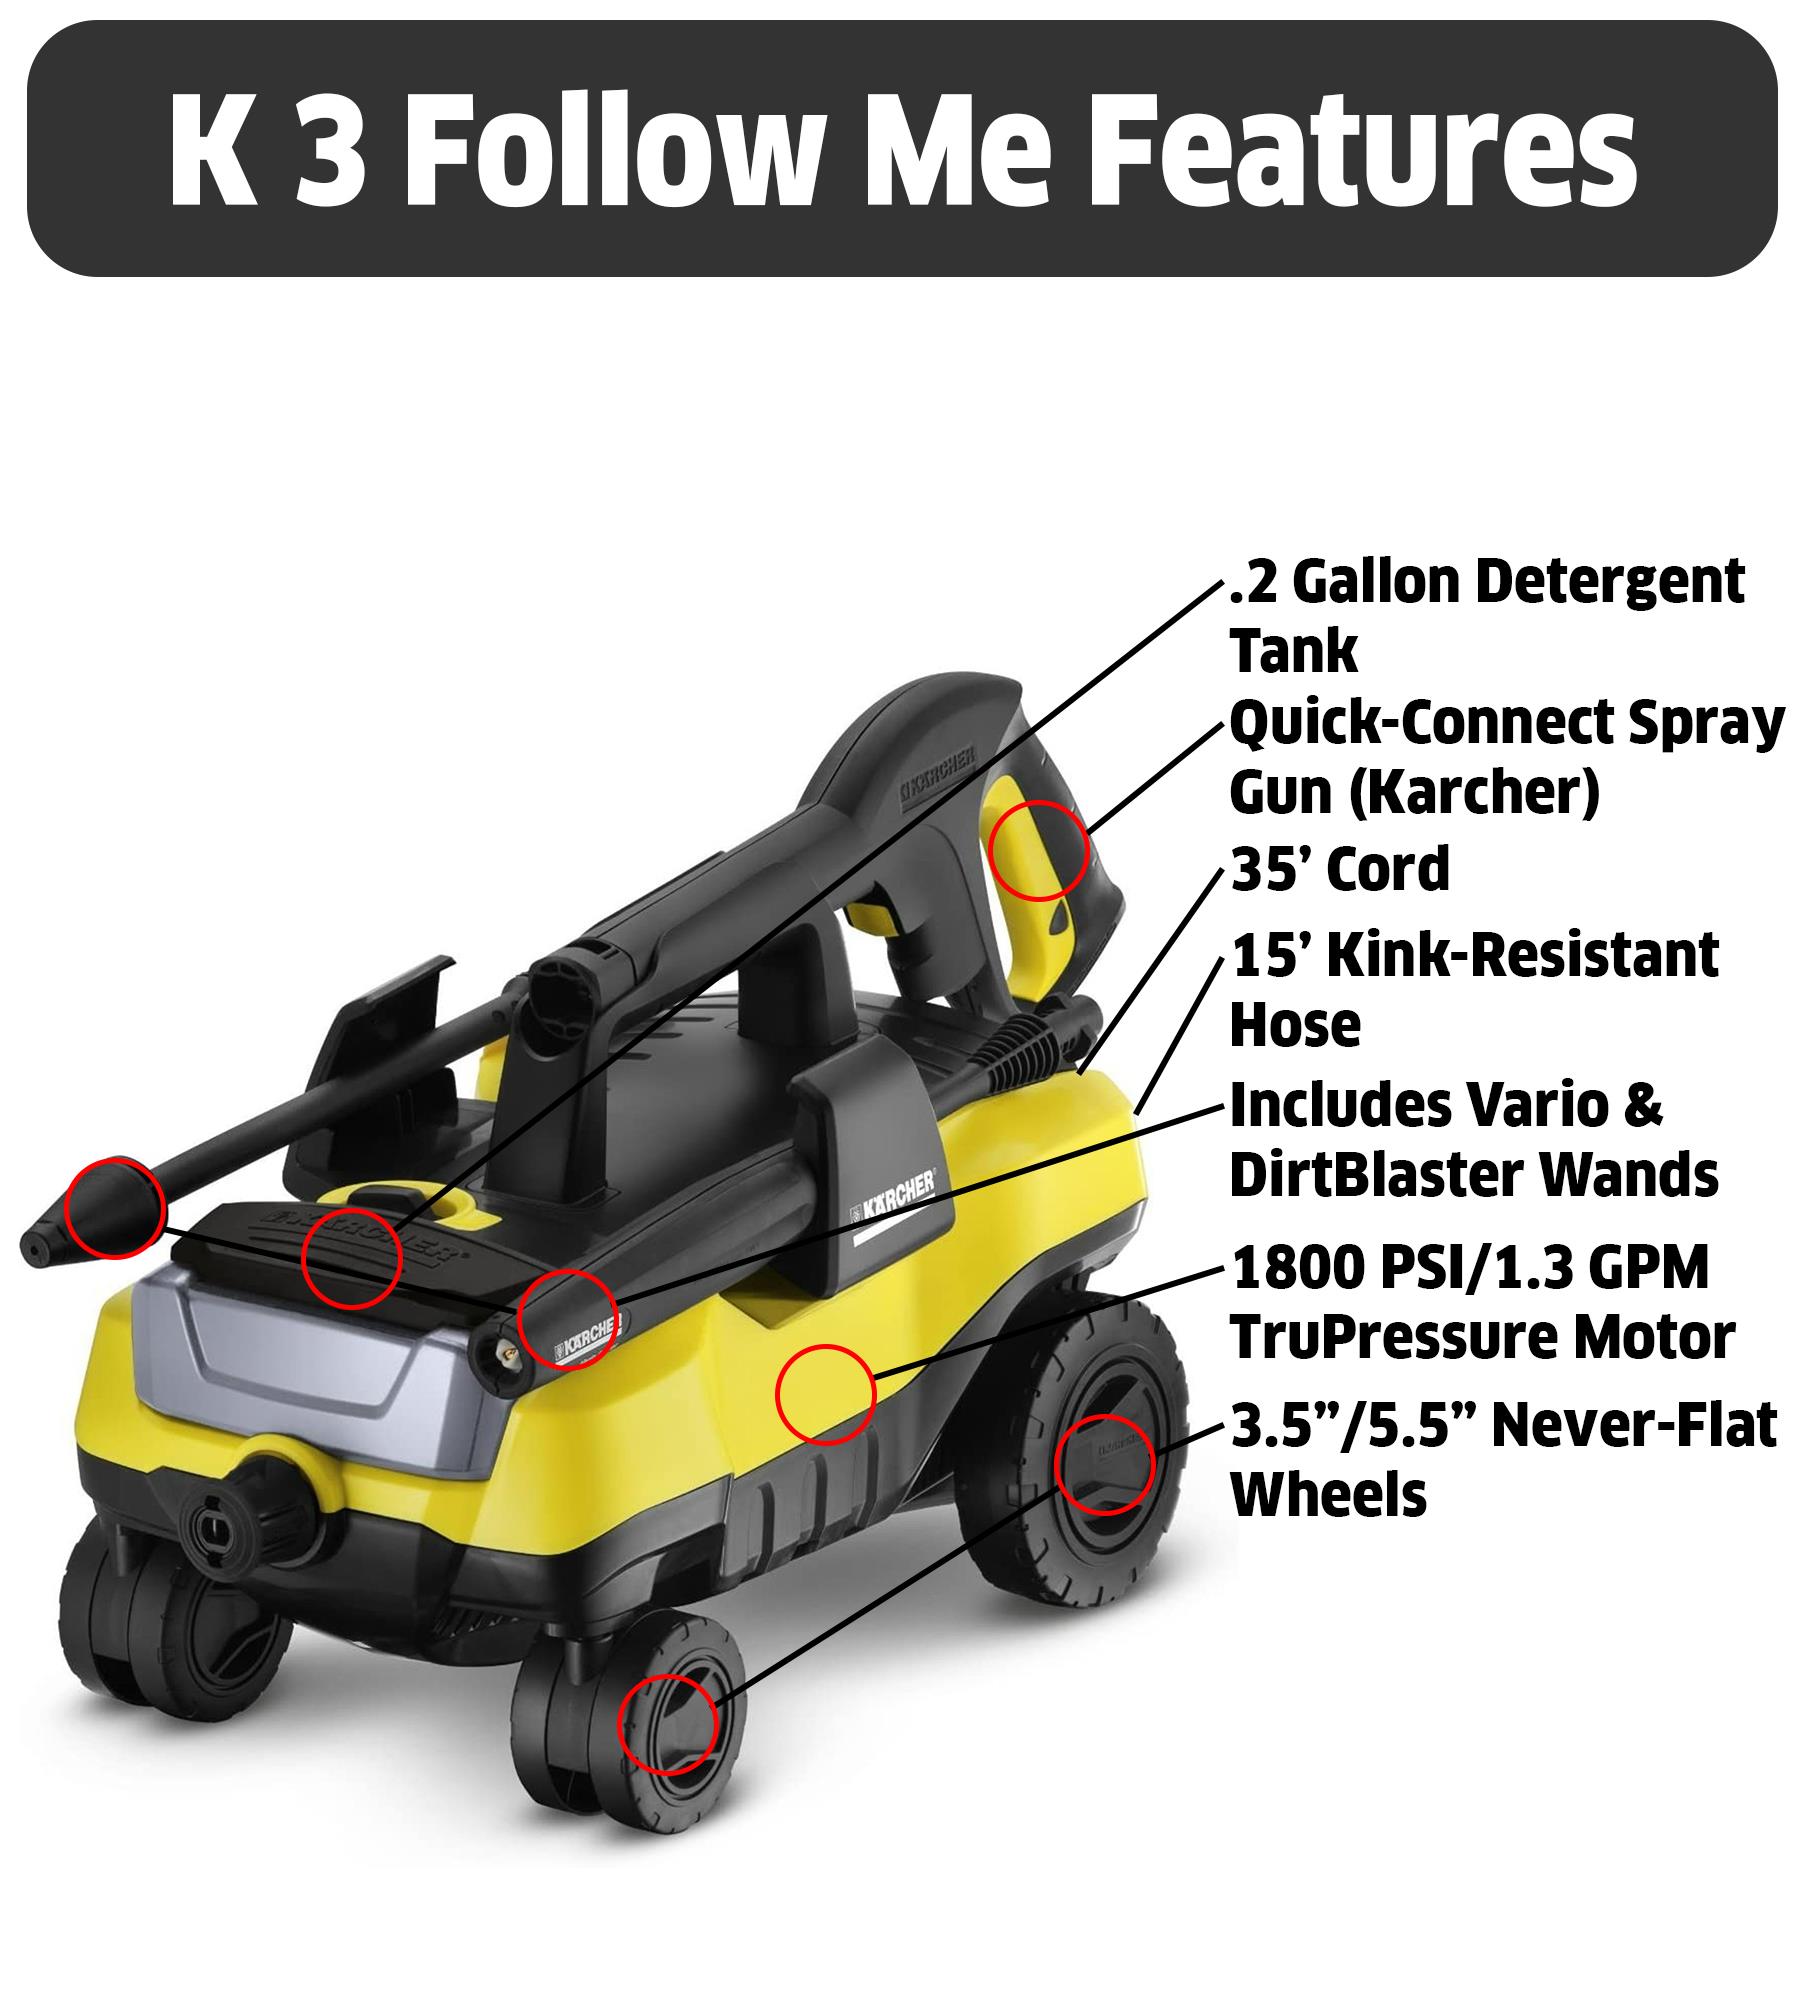 Kärcher K2 Entry - 1600 PSI Portable Electric Power Pressure Washer with  Vario & Dirtblaster Spray Wands – 1.35 GPM